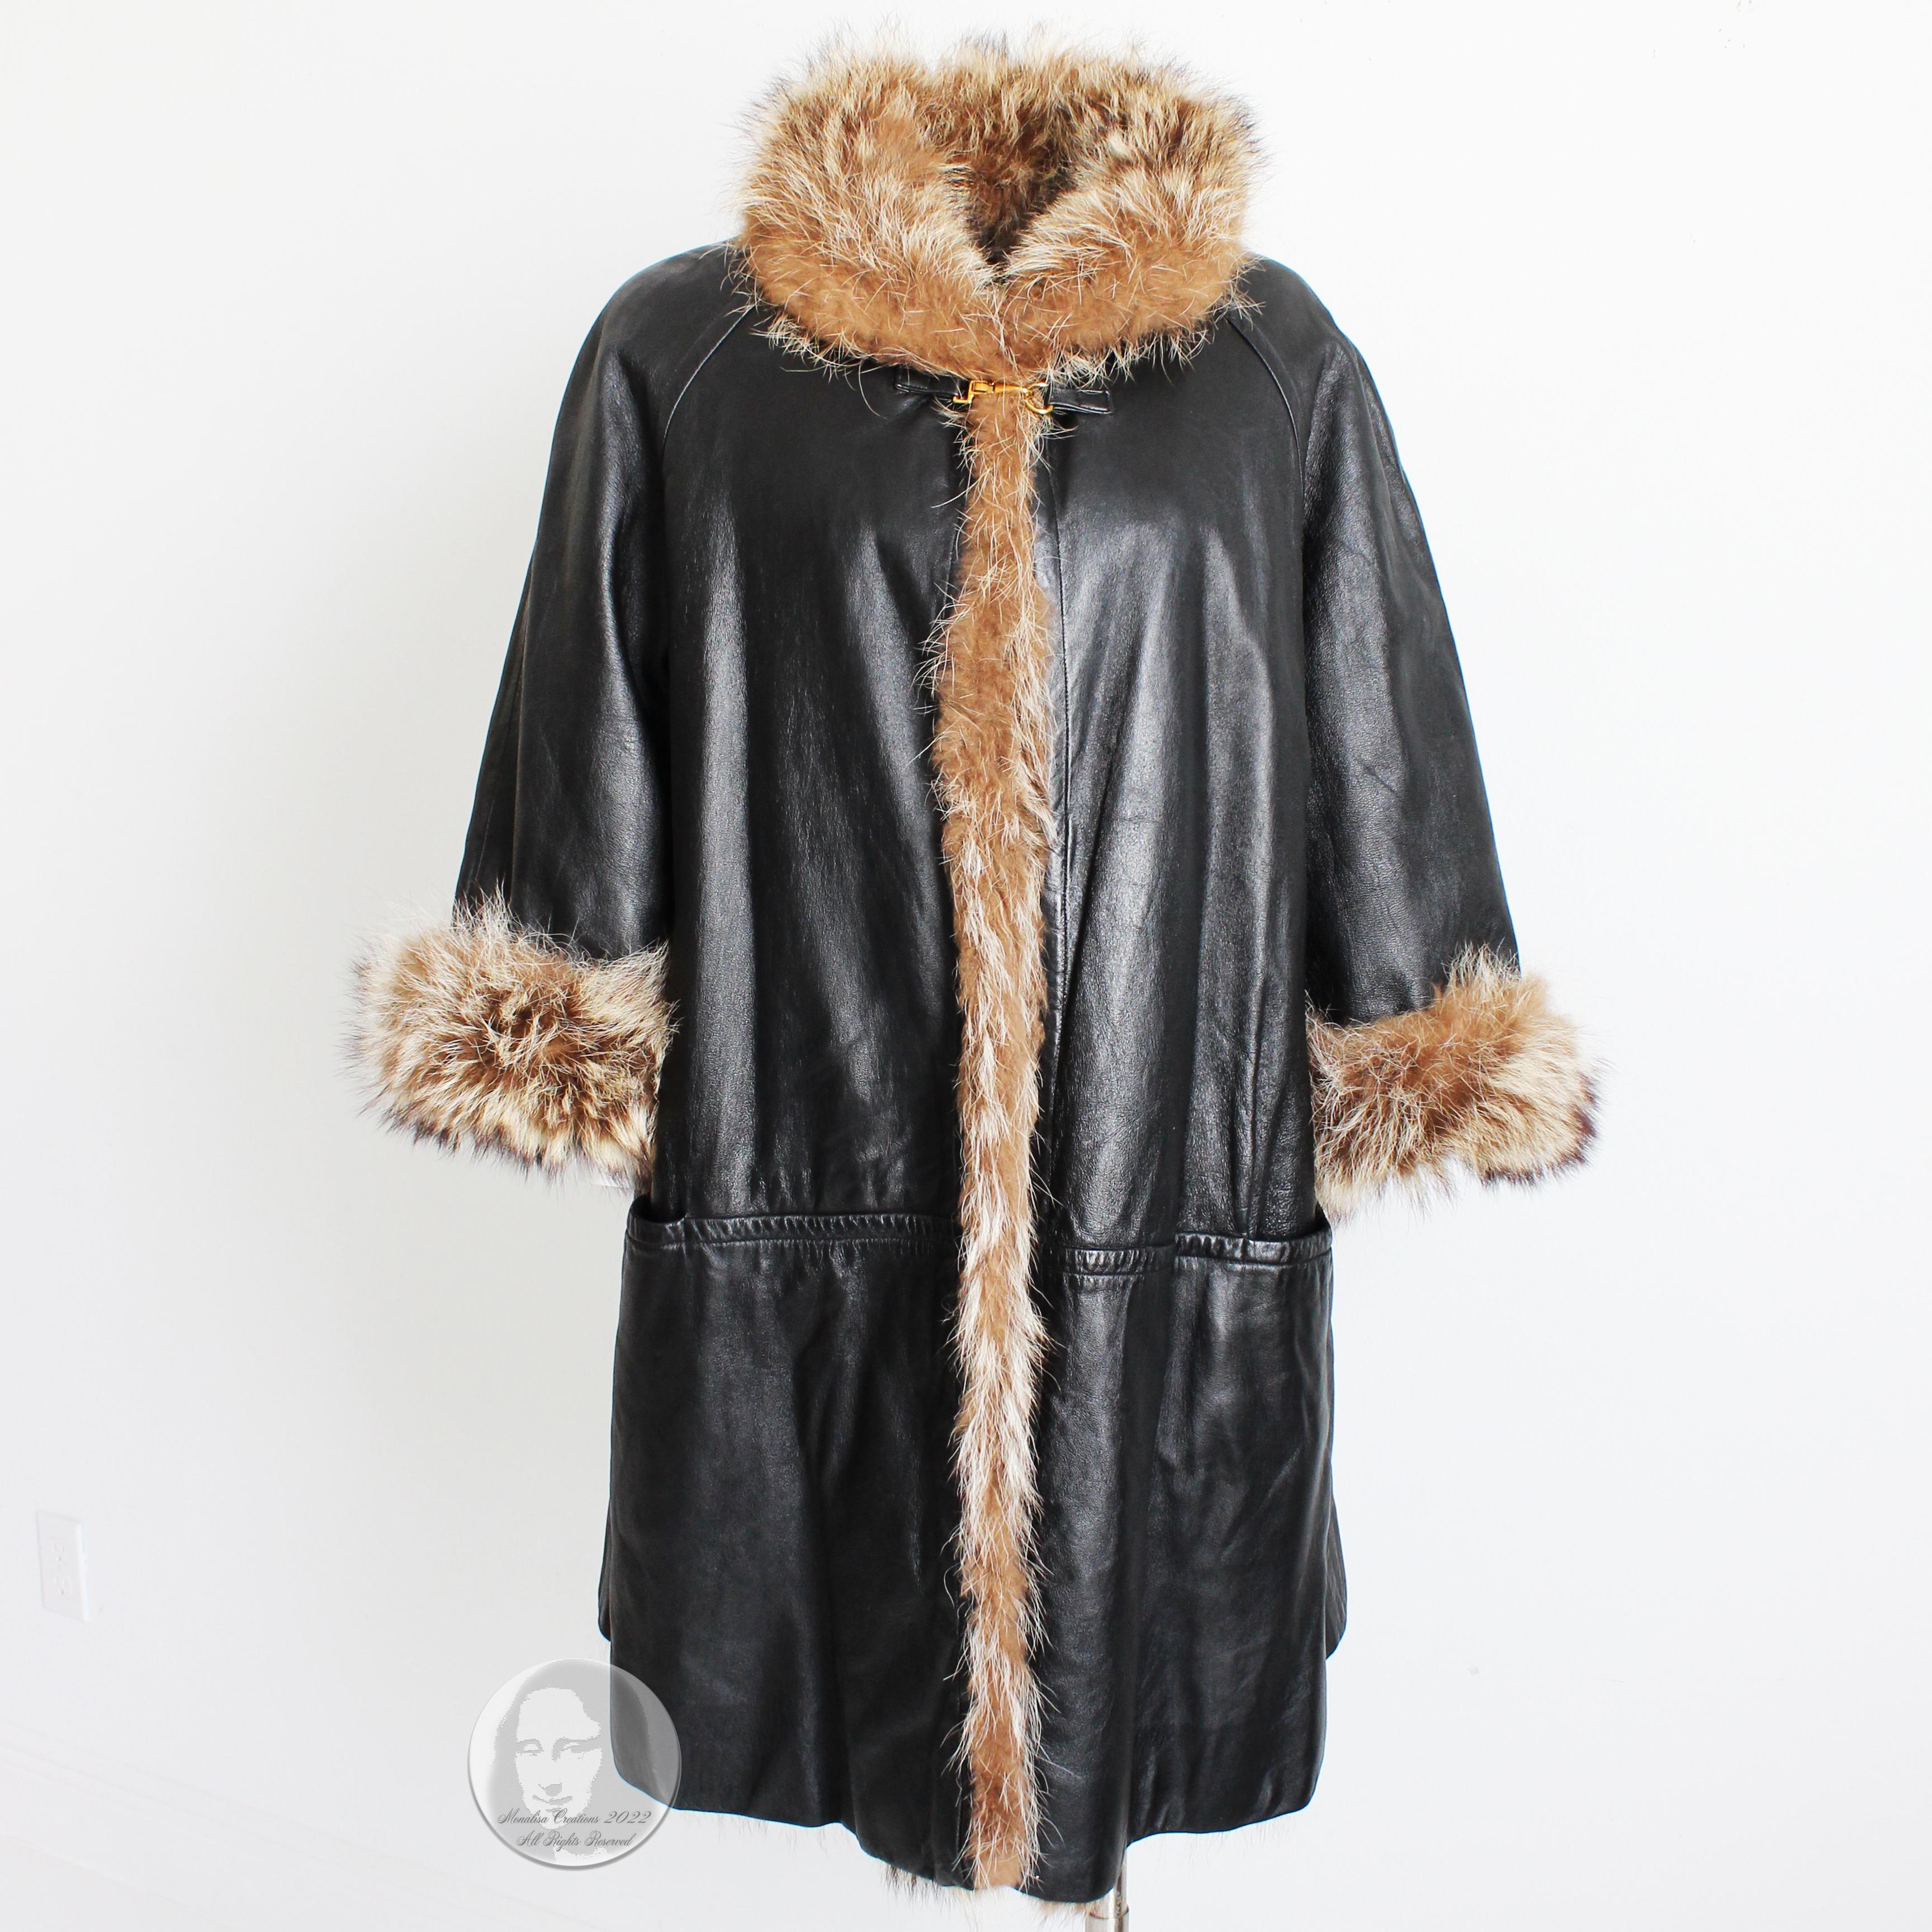 Bonnie Cashin for Sills Coat Black Leather Reversible Raccoon Fur Vintage 1960s  In Good Condition For Sale In Port Saint Lucie, FL